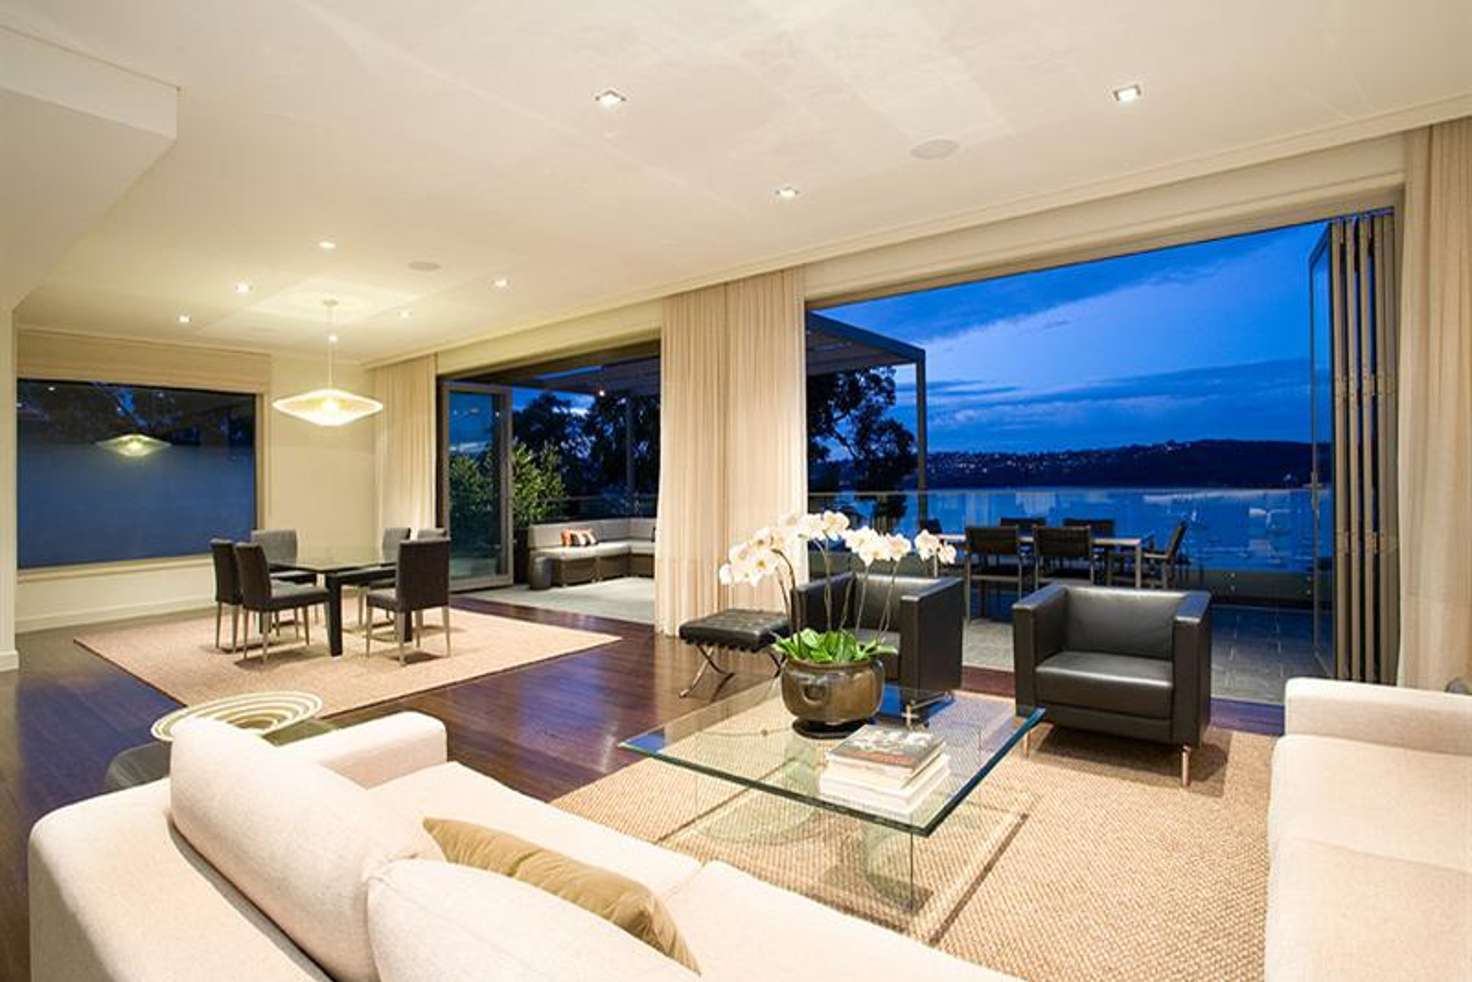 Main view of Homely house listing, 9 Plunkett Road, Mosman NSW 2088